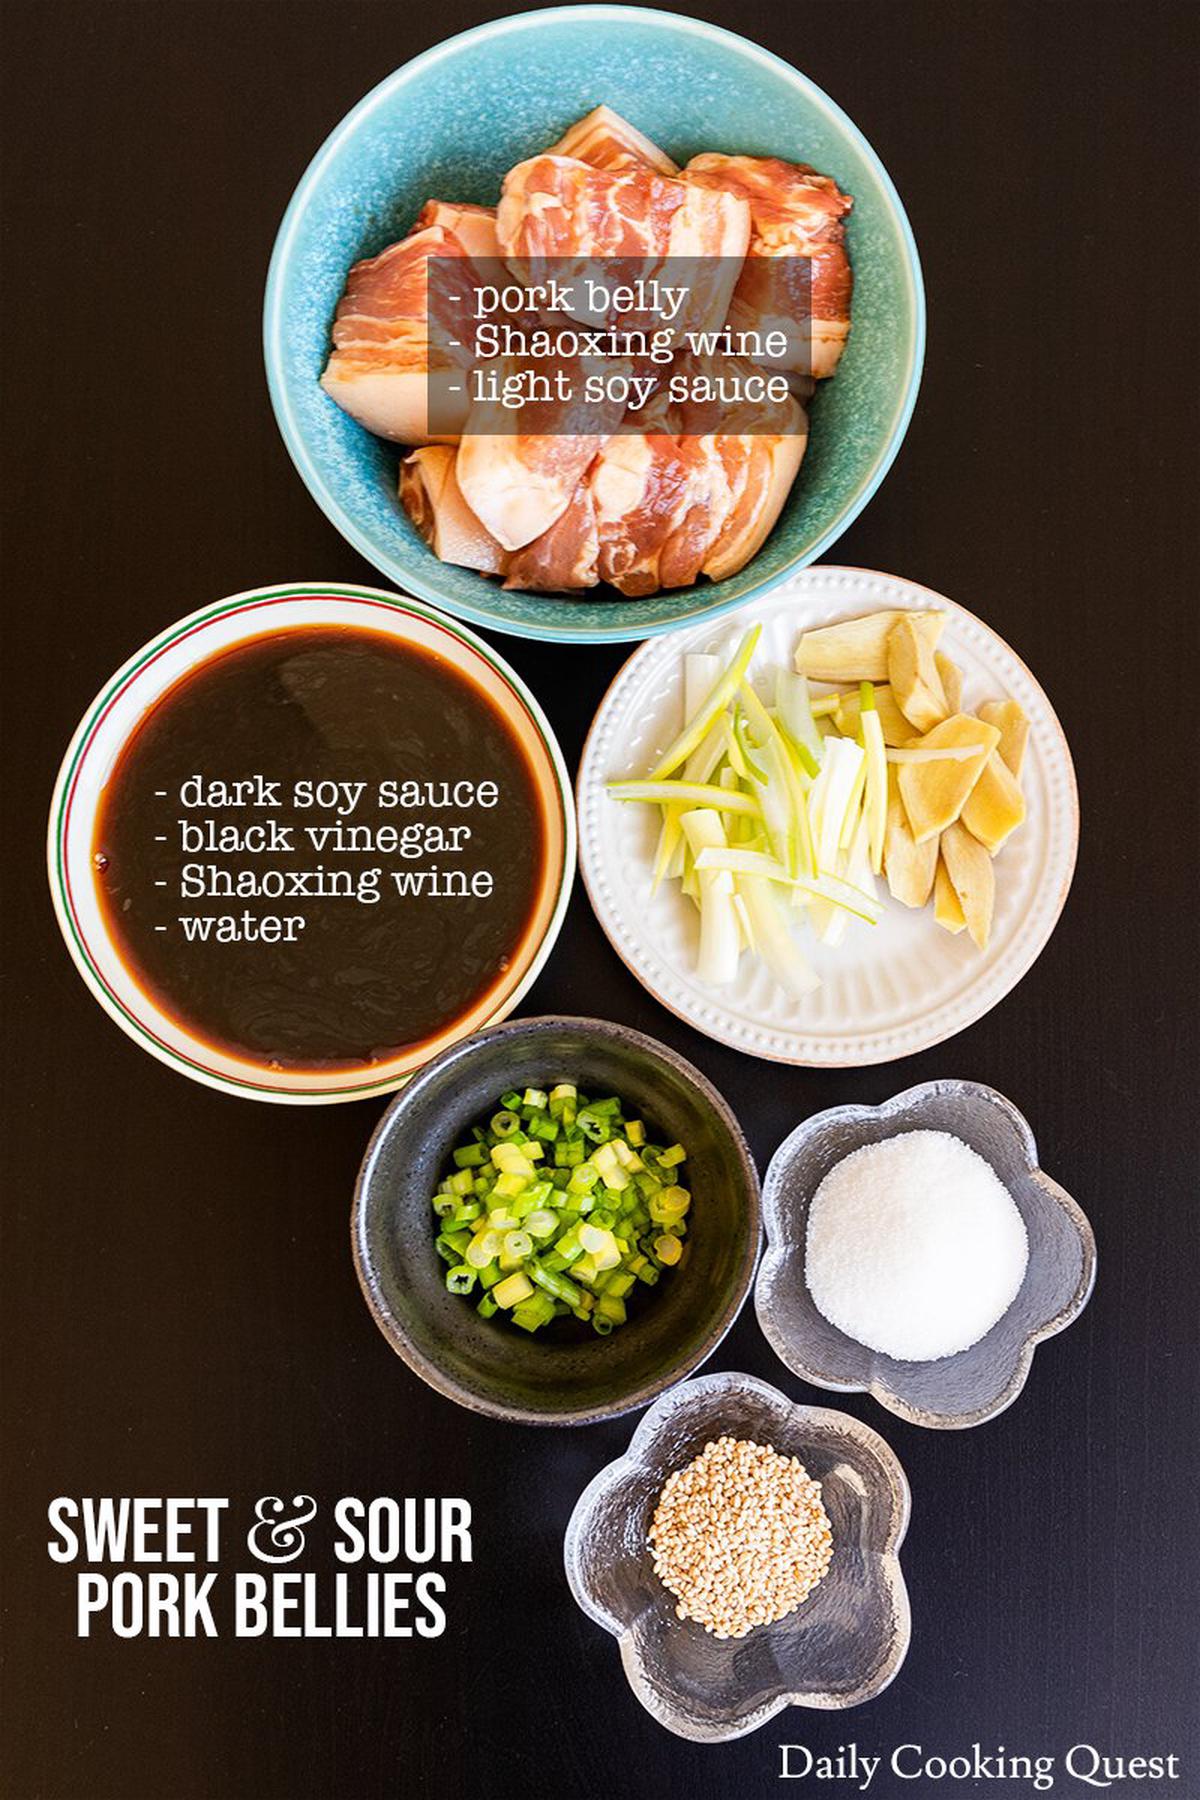 Ingredients to prepare Chinese sweet and sour pork bellies: pork belly, light soy sauce, Shaoxing wine, ginger, scallions, sugar, dark soy sauce, black vinegar, and sesame seeds.